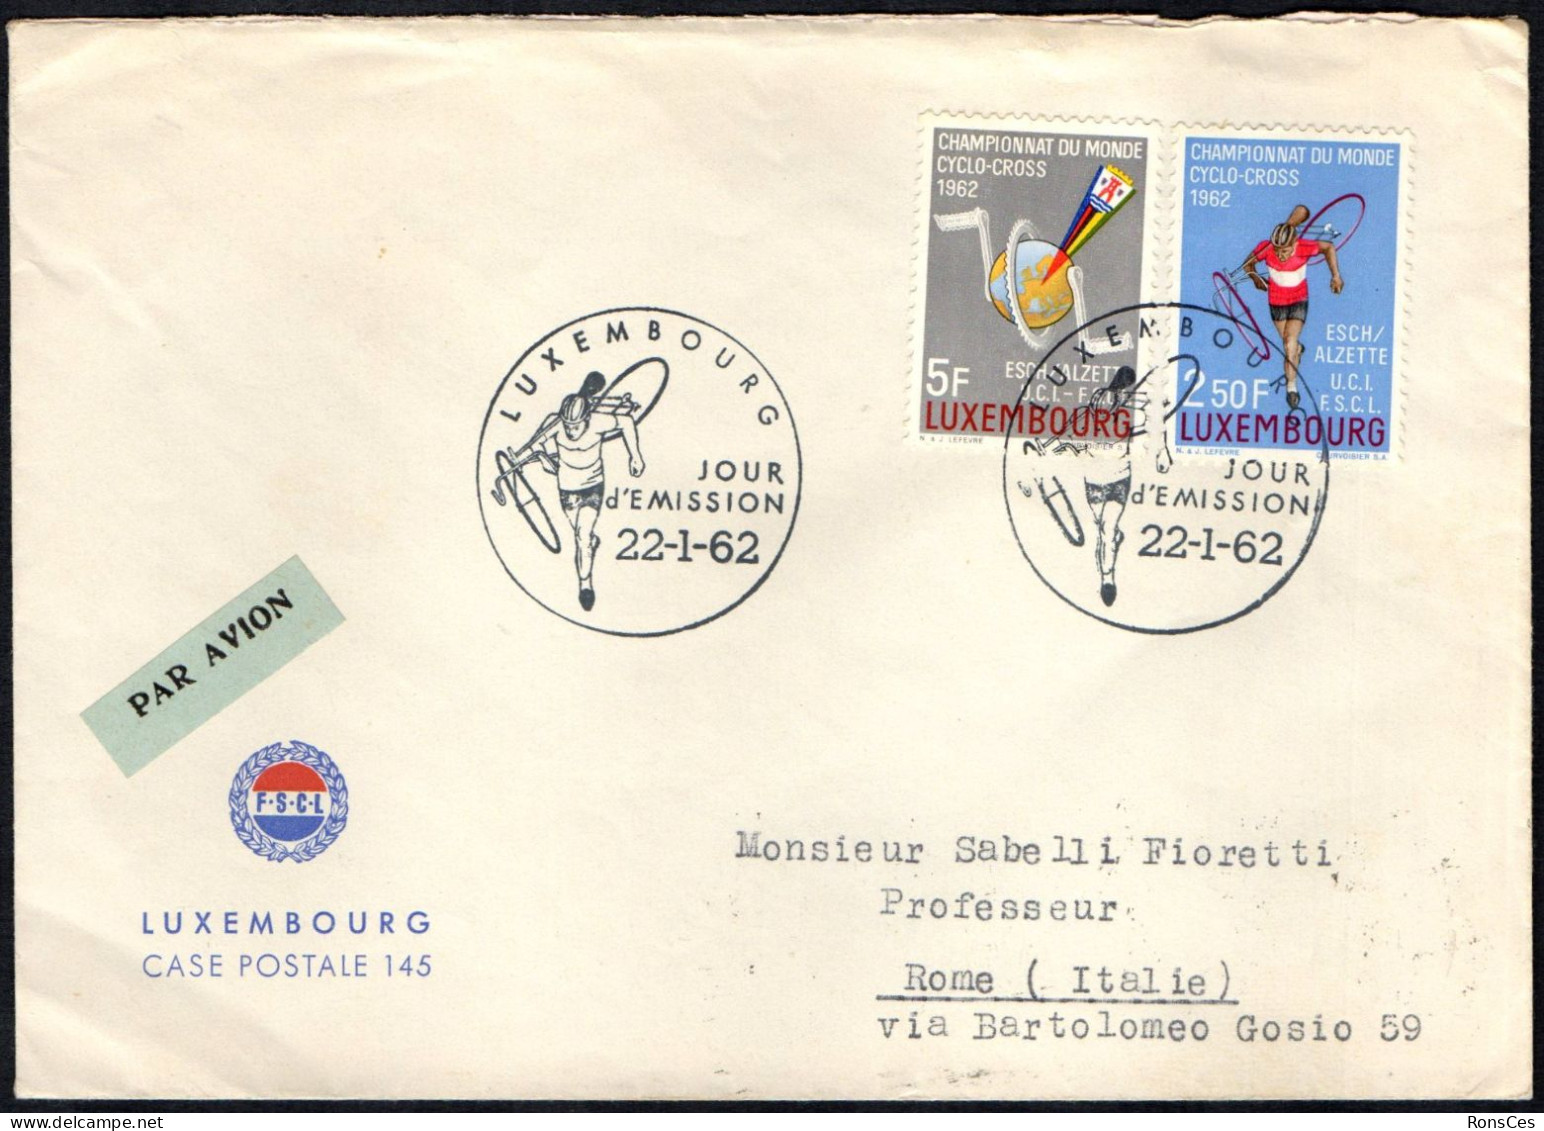 CYCLING - LUXEMBOURG 1962 - CHAMPIONNAT DU MONDE CYCLO-CROSS - MAILED FDC - A - Cyclisme